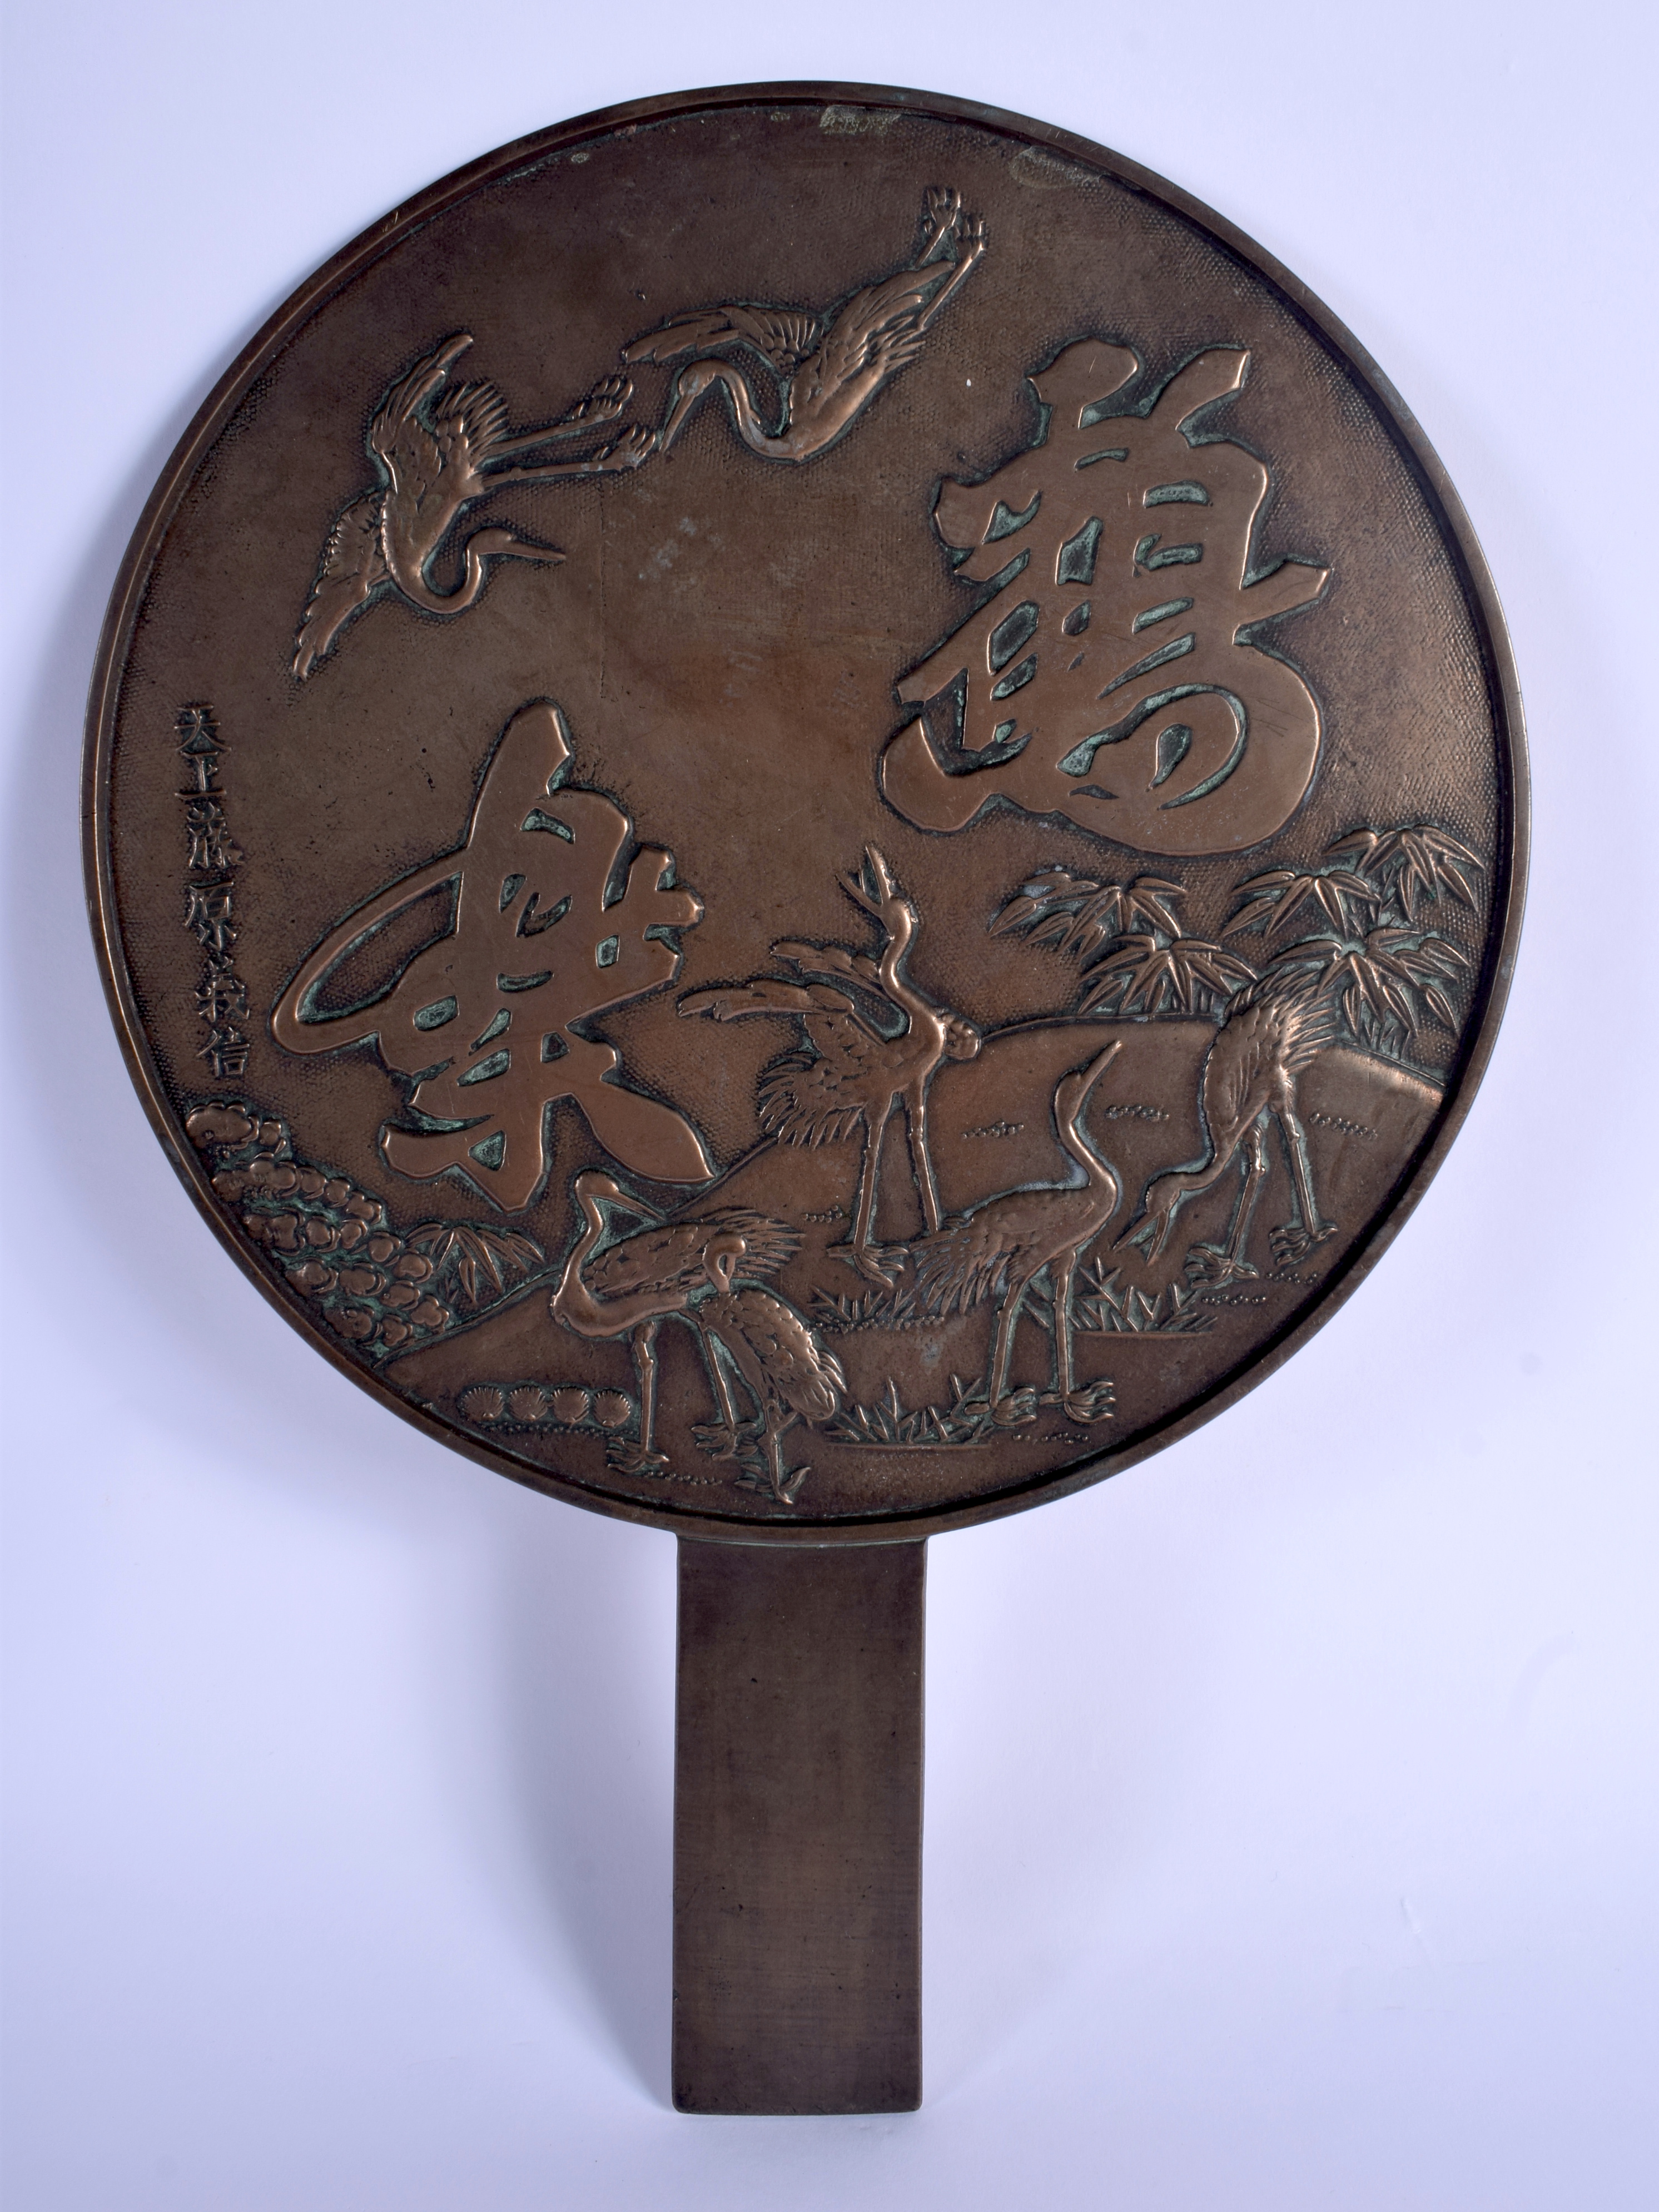 A 19TH CENTURY JAPANESE MEIJI PERIOD BRONZE HAND MIRROR decorated with birds and landscapes. 33 cm x